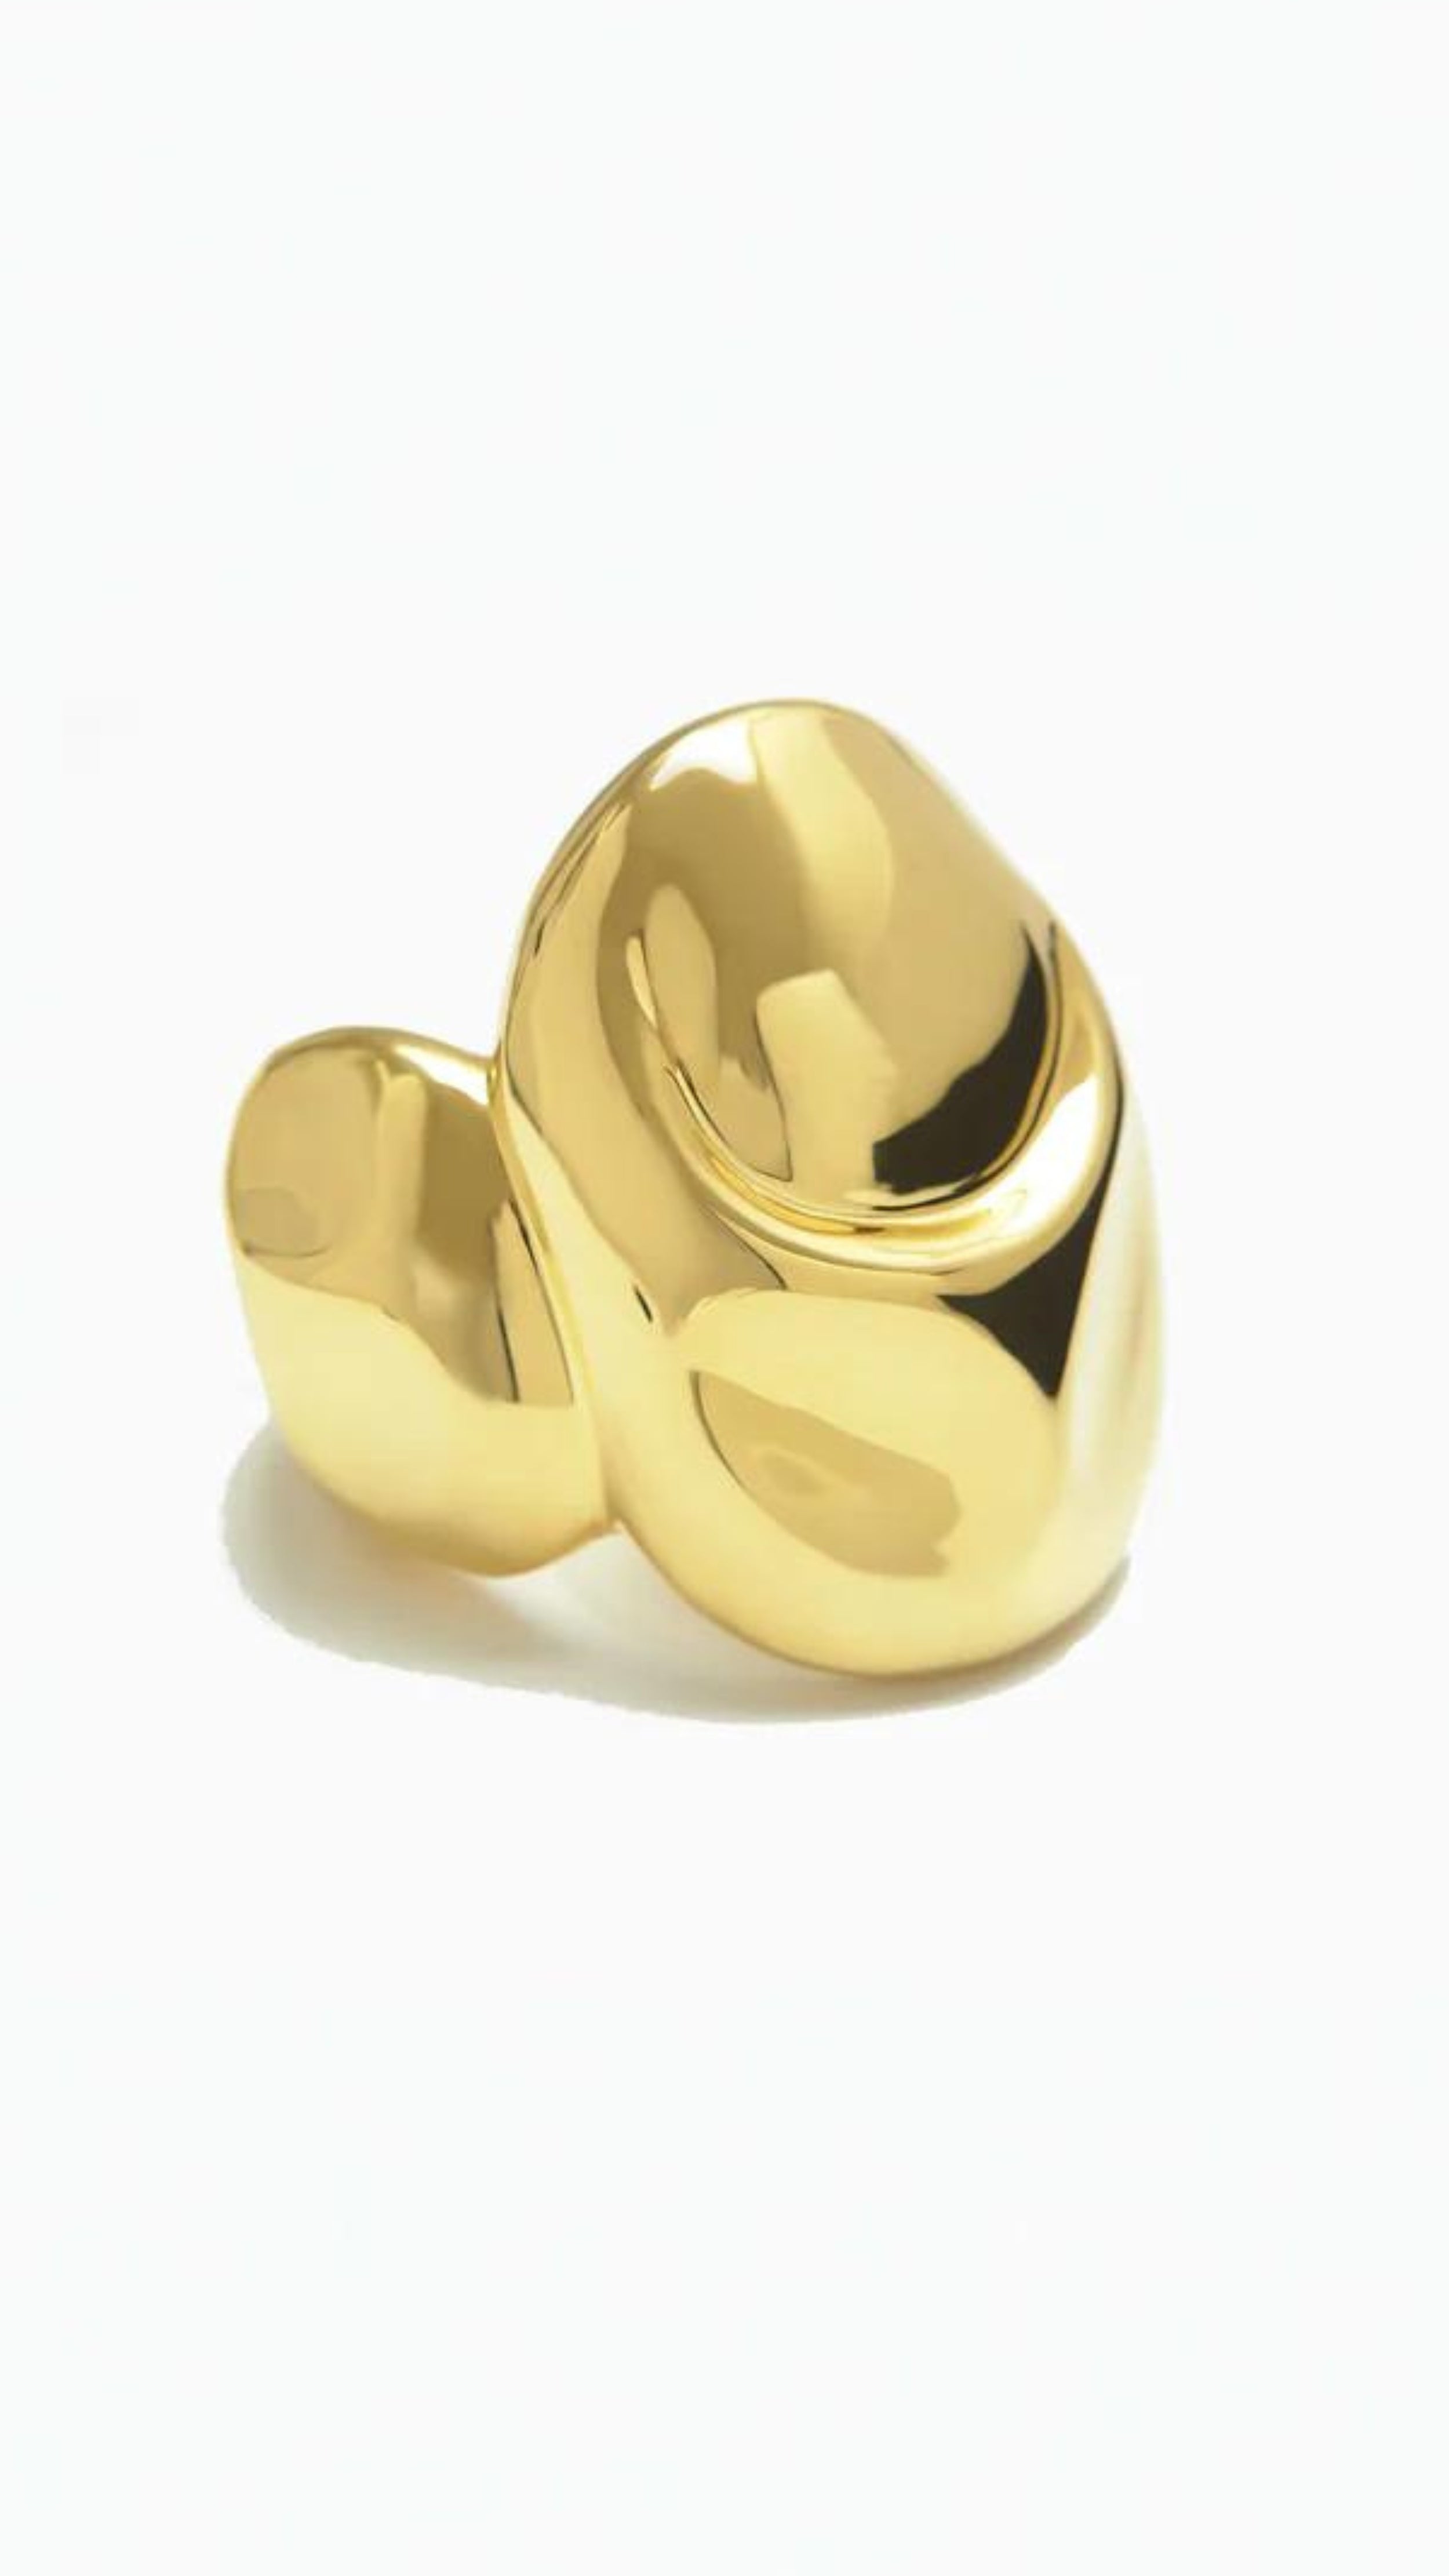 Monica Sordo Cubagua Cuff Bracelet is a statement piece crafted in beautiful organic shaped 24 carat plated gold. Photo shows cuff bracelet from the front. Sustainable and fair trade jewelry.